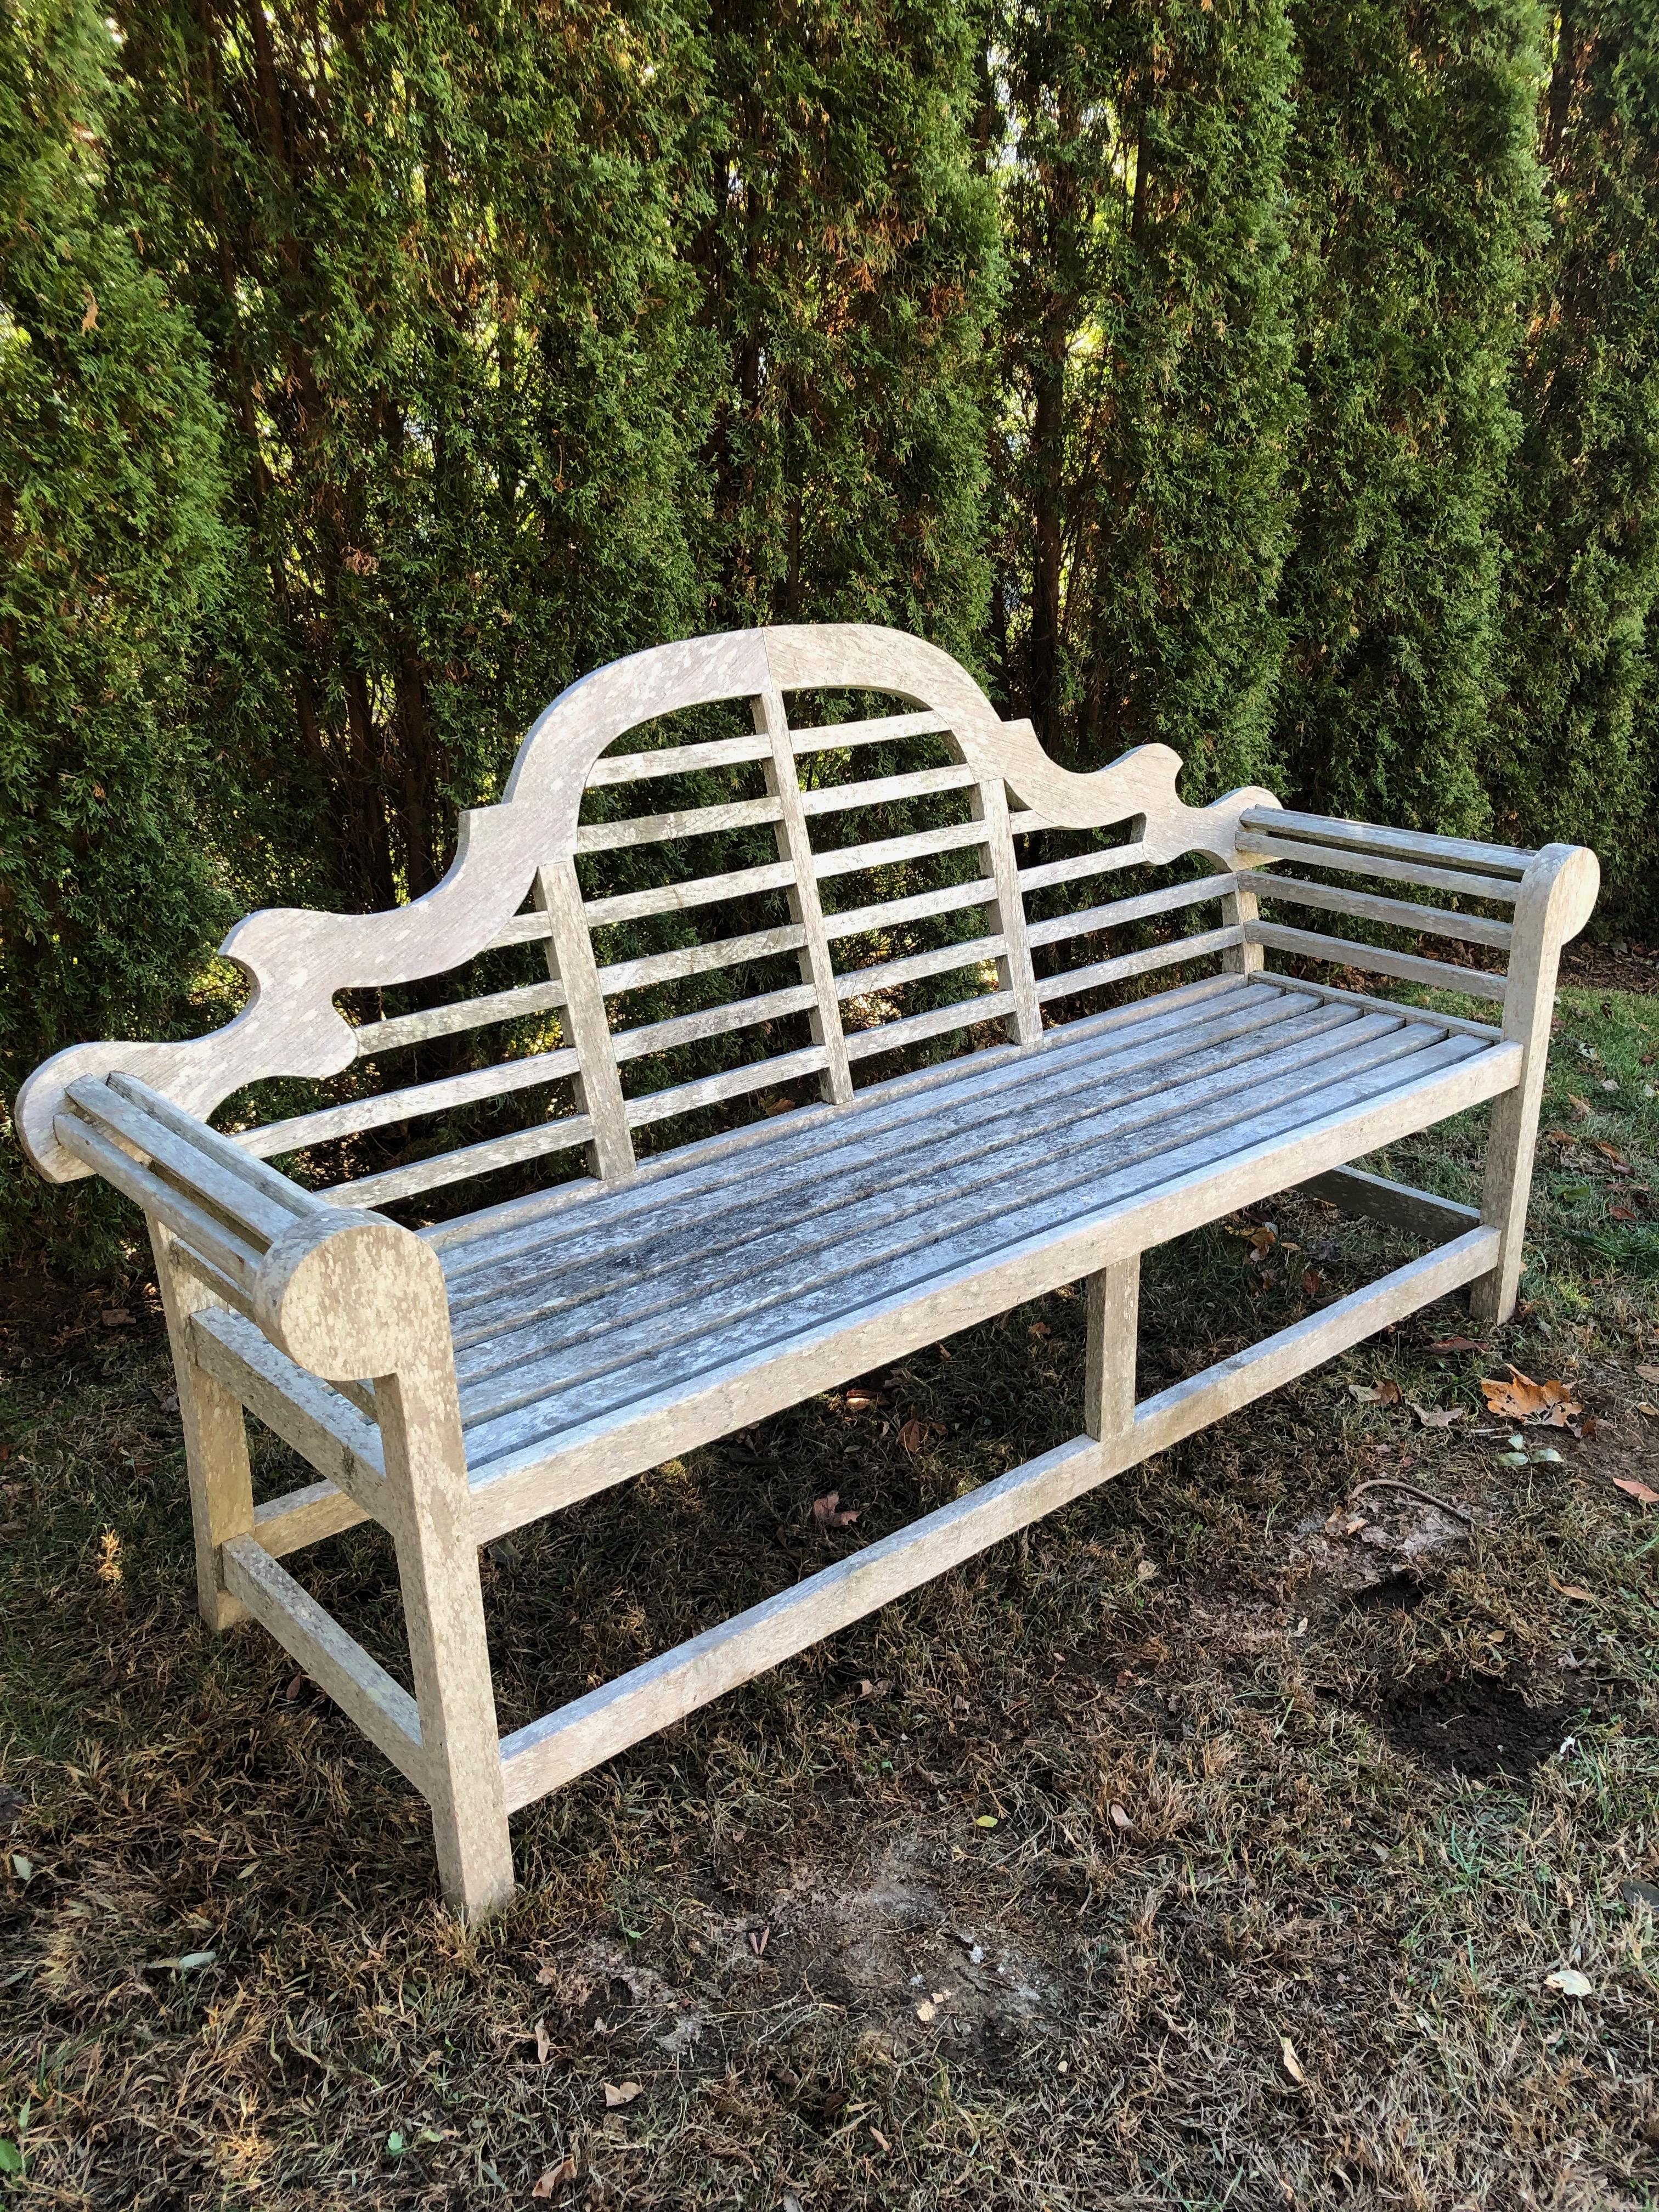 This classical teak bench, originally designed by the famous English architect Sir Edwin Lutyens in the early 1900s, has a lovely silvered surface with a hint of lichen that belies its age. Perfect against an evergreen hedge or as a viewing spot for